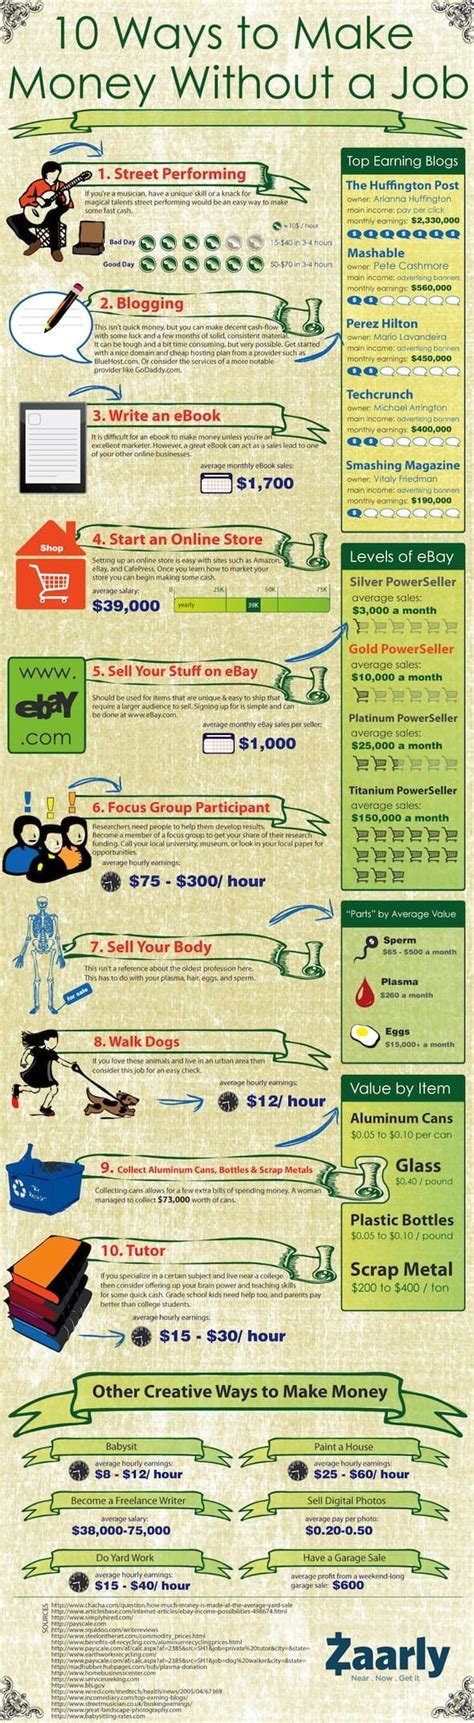 How to make money as a teenager without a job. 10 Ways to Make Money Without a Job | Daily Infographic